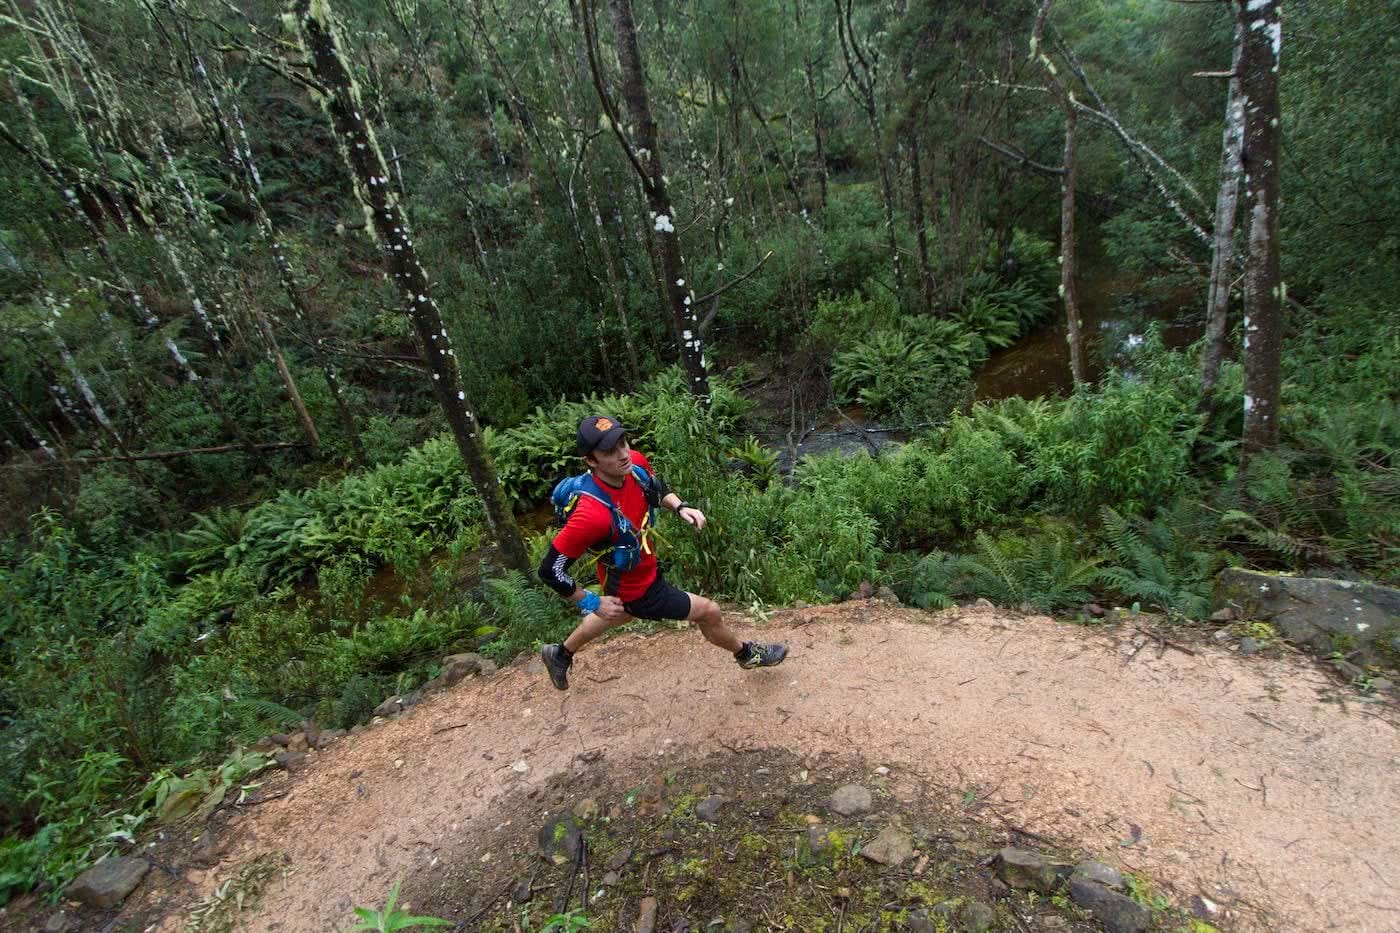 The Ultimate Beginner’s Guide To Trail Running, Chris Ord, single track, runner, hydration pack, woods, trees